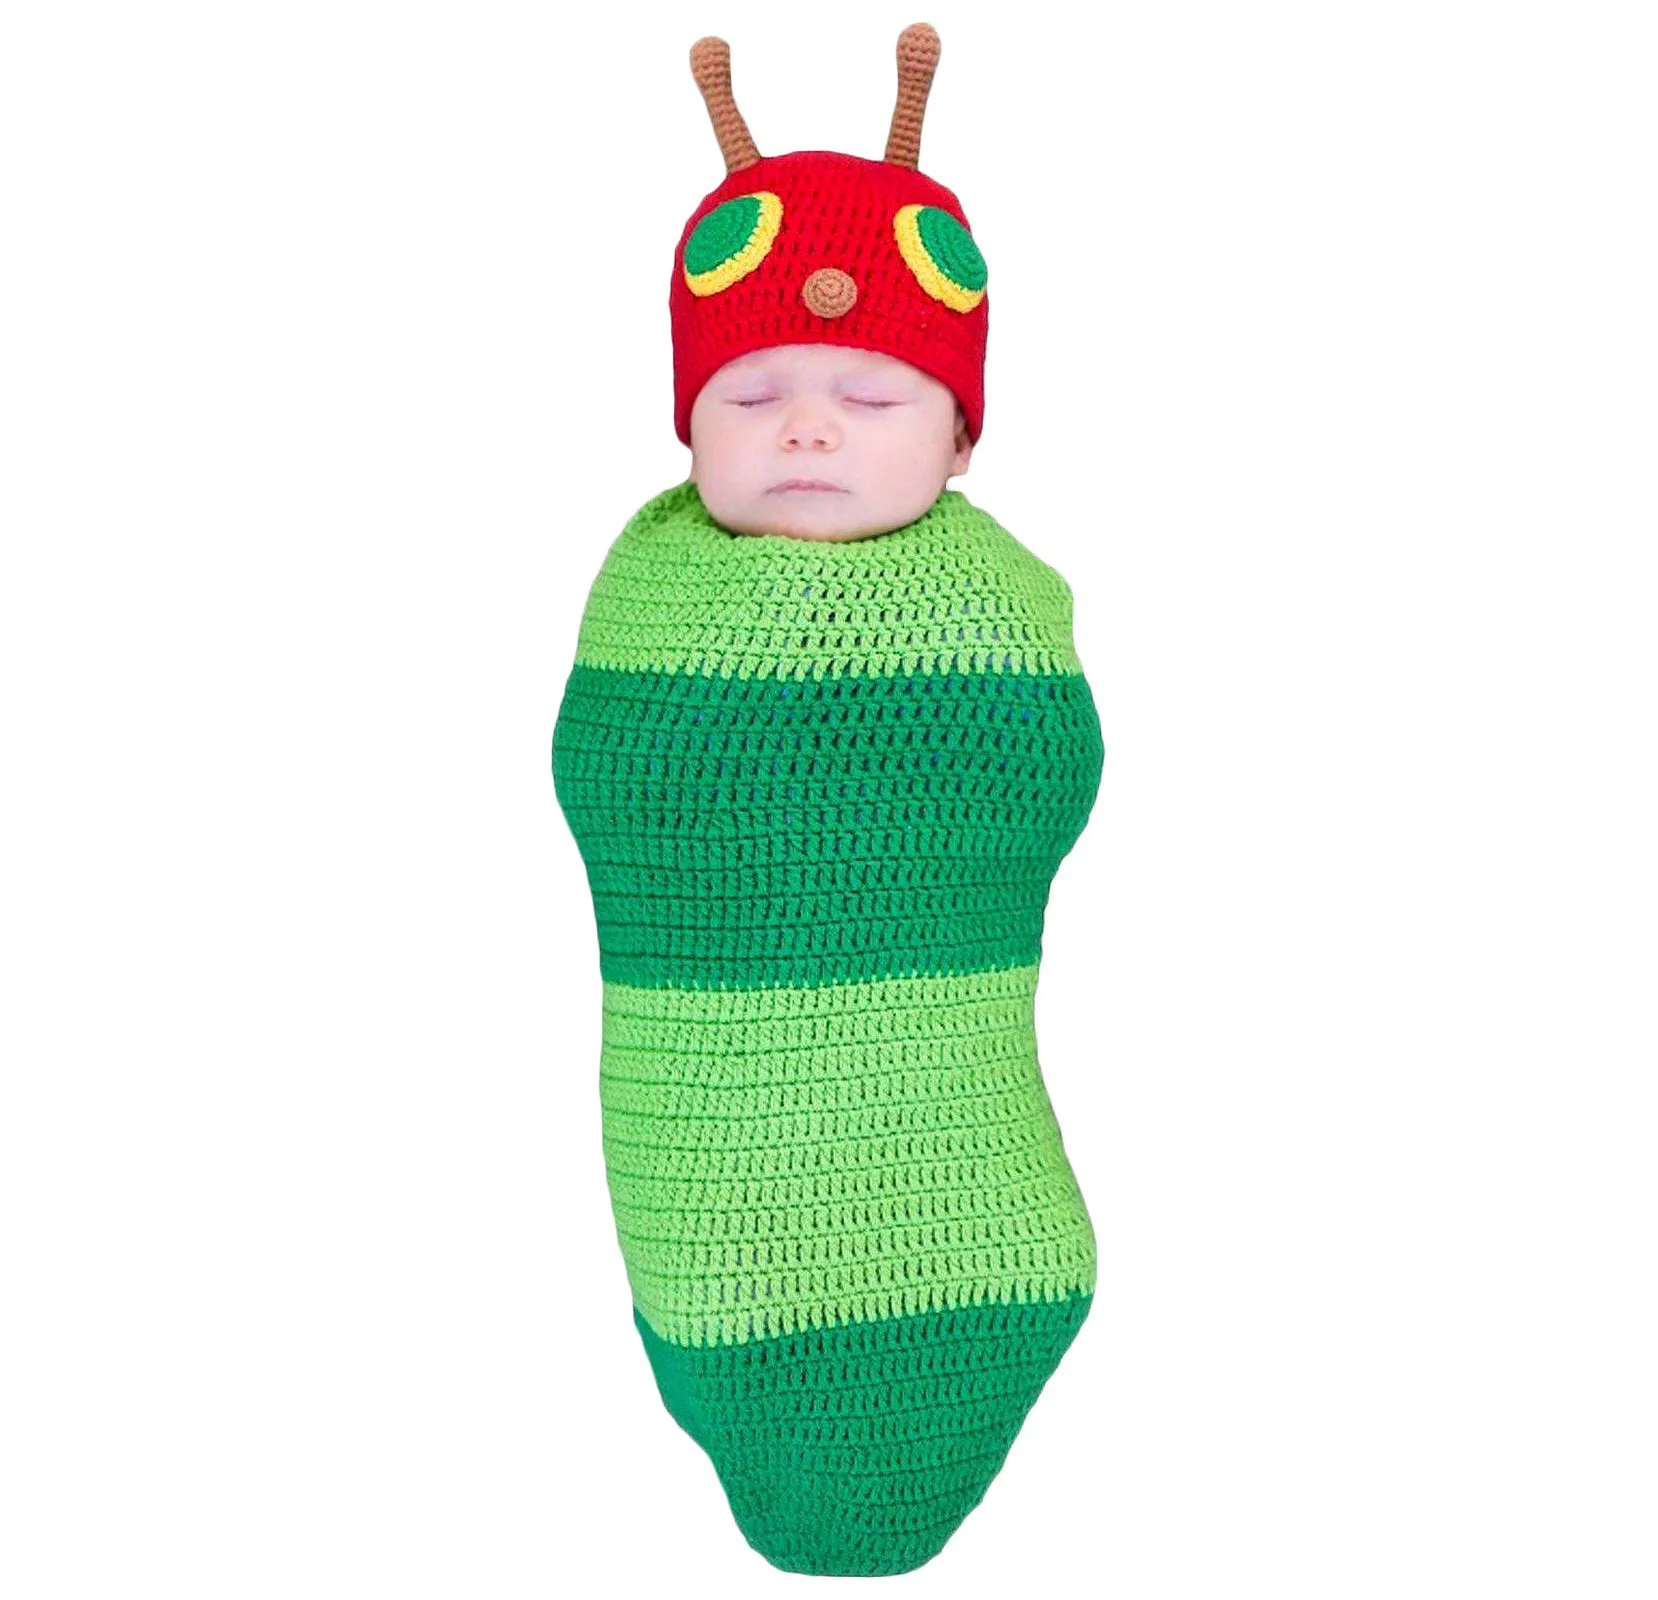 Caterpillar Infant Bunting Costume from Target